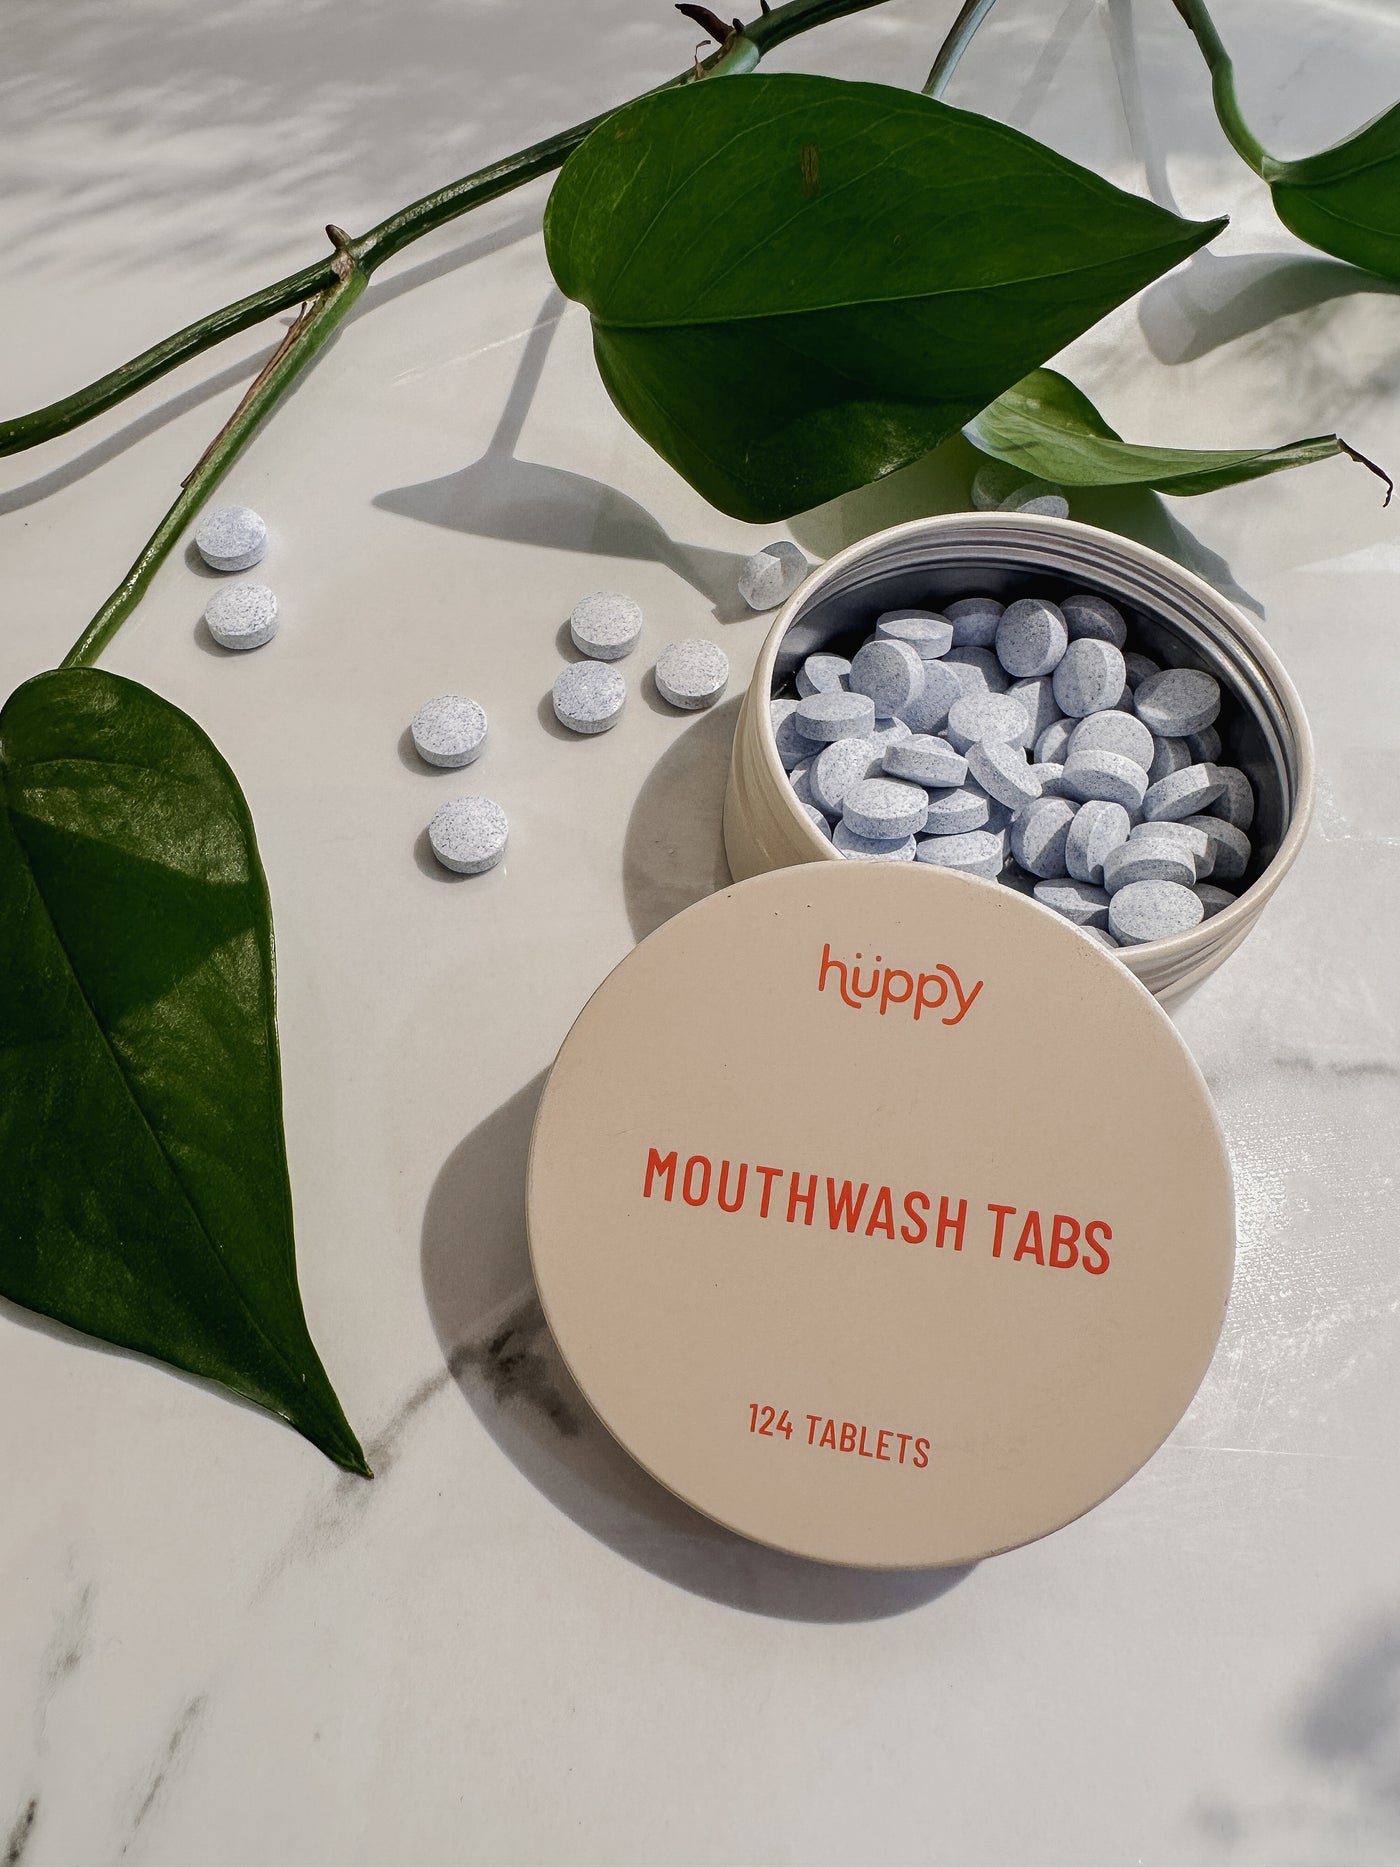 Huppy Refillable Mouthwash Tablets Tin - Simple Good